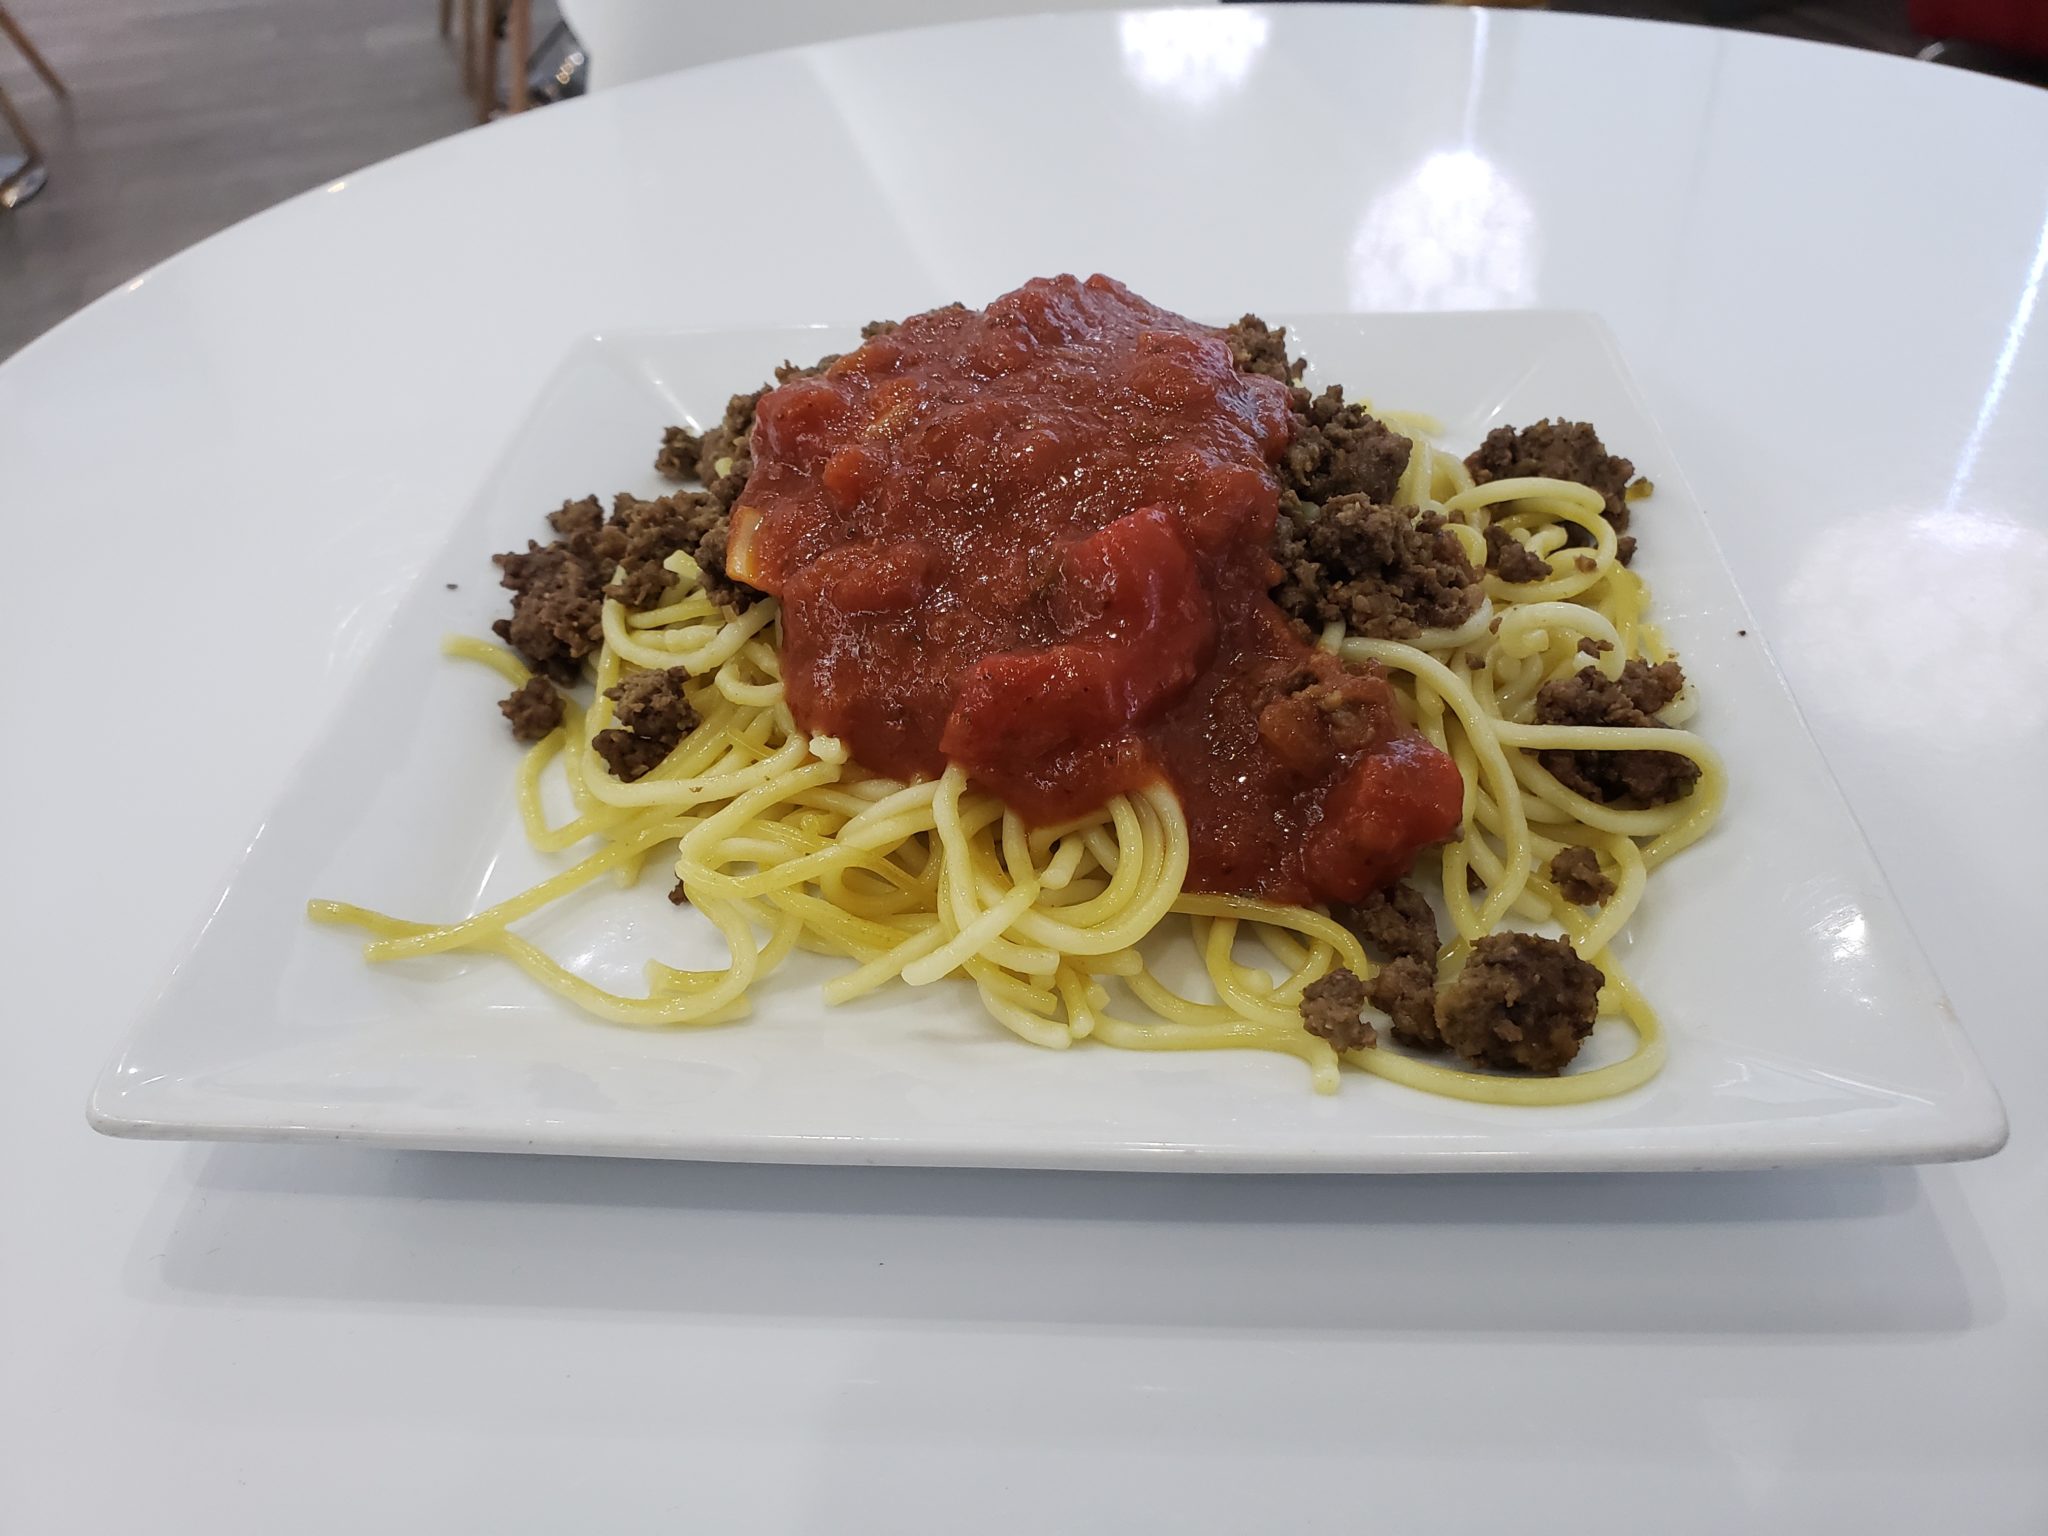 a plate of spaghetti and meat on a white surface